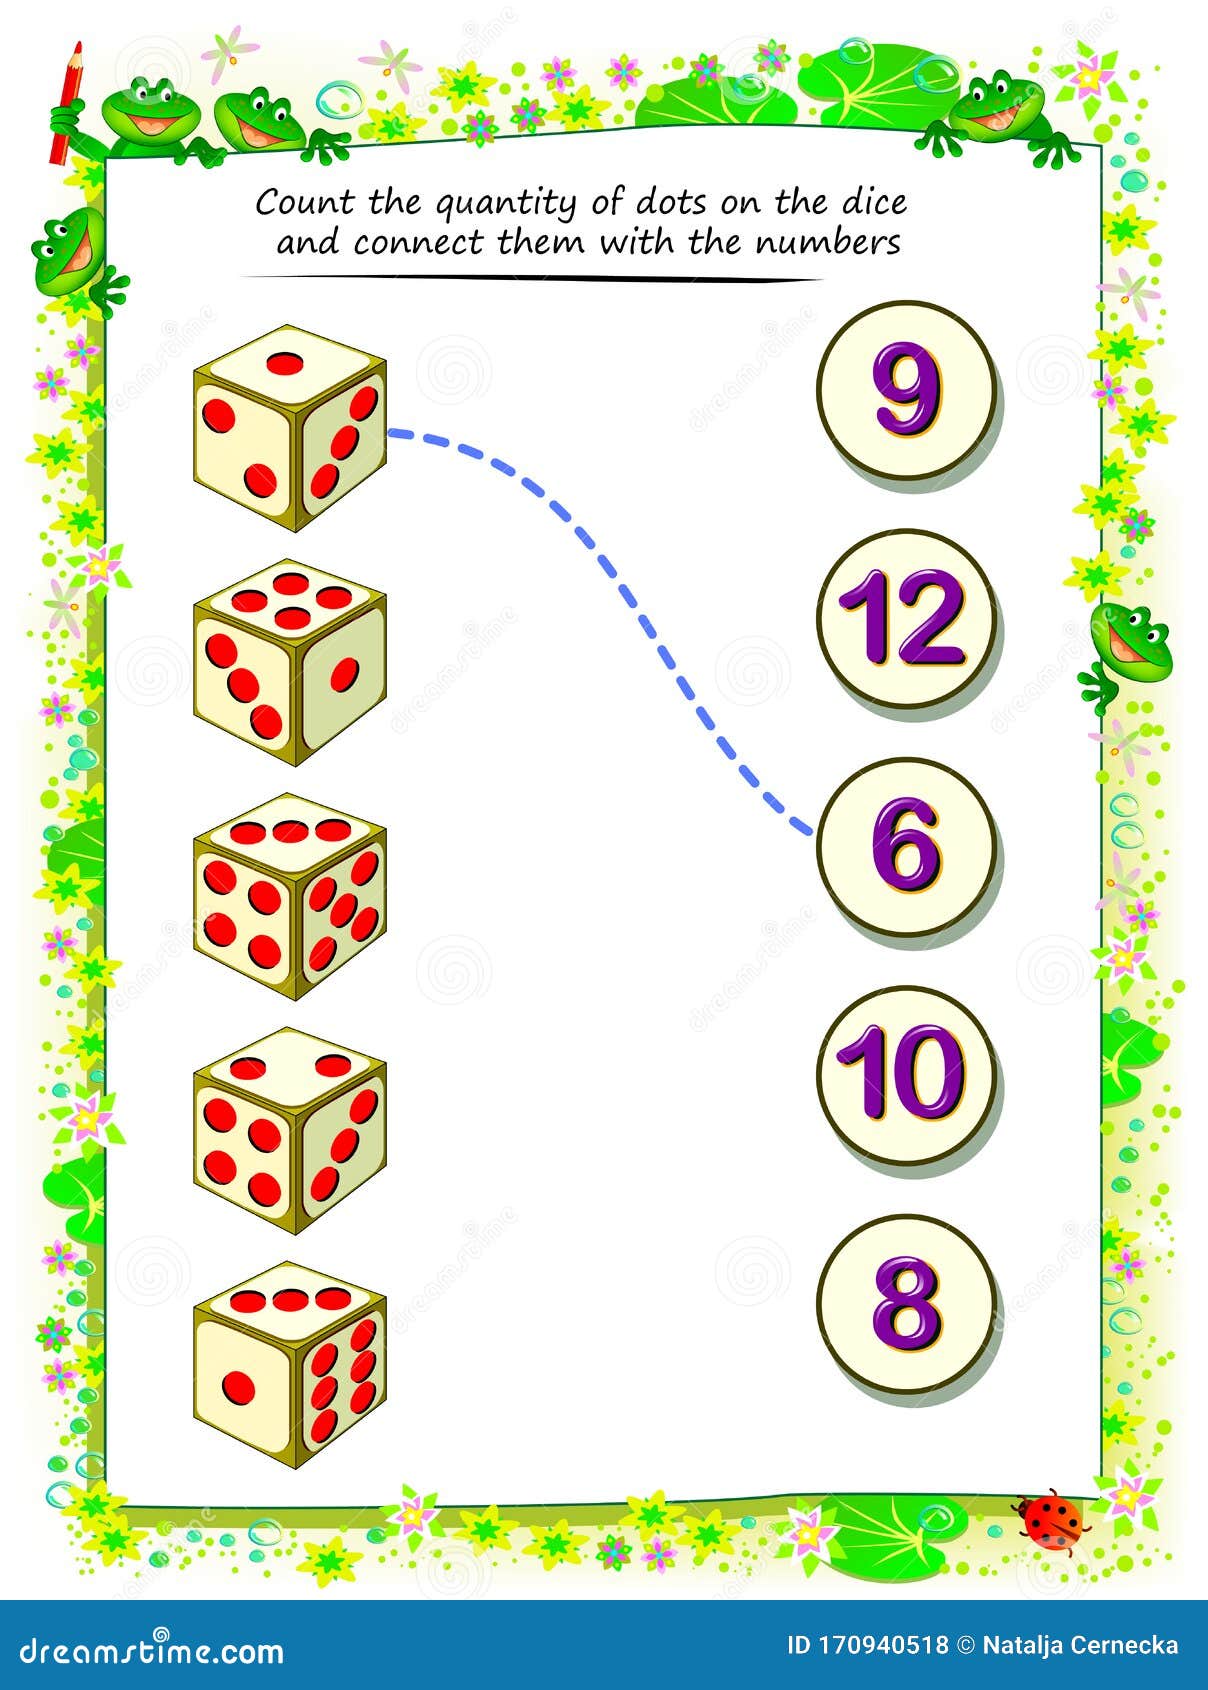 math-education-for-children-count-the-quantity-of-dots-on-dice-and-connect-them-with-numbers